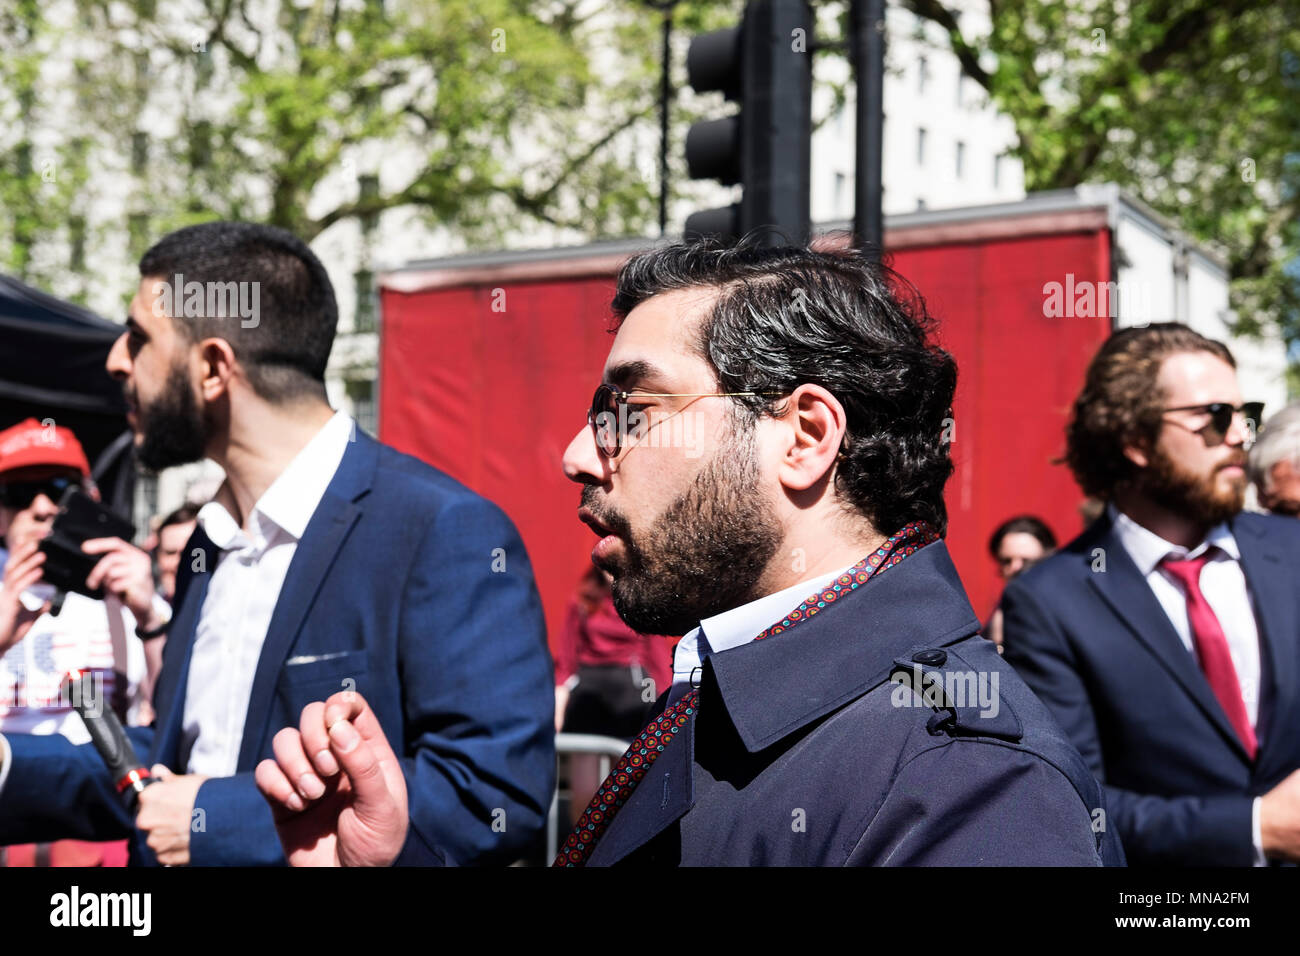 Raheem Kassam speaks with Muslim protesters at the Day for Freedom event in Whitehall. Raheem Kassam is the head of Breitbart media UK and considered by many to be a right wing journalist.  The Day for Freedom rally was organised by Tommy Robinson and members of his team. The event was arranged by Mr Robinson's team in response to a culmination of events which they perceived as having impacted their freedom of speech. Within the UK there is a growing debate on what is freedom of speech and what is hate speech, and if both can coexist. Stock Photo